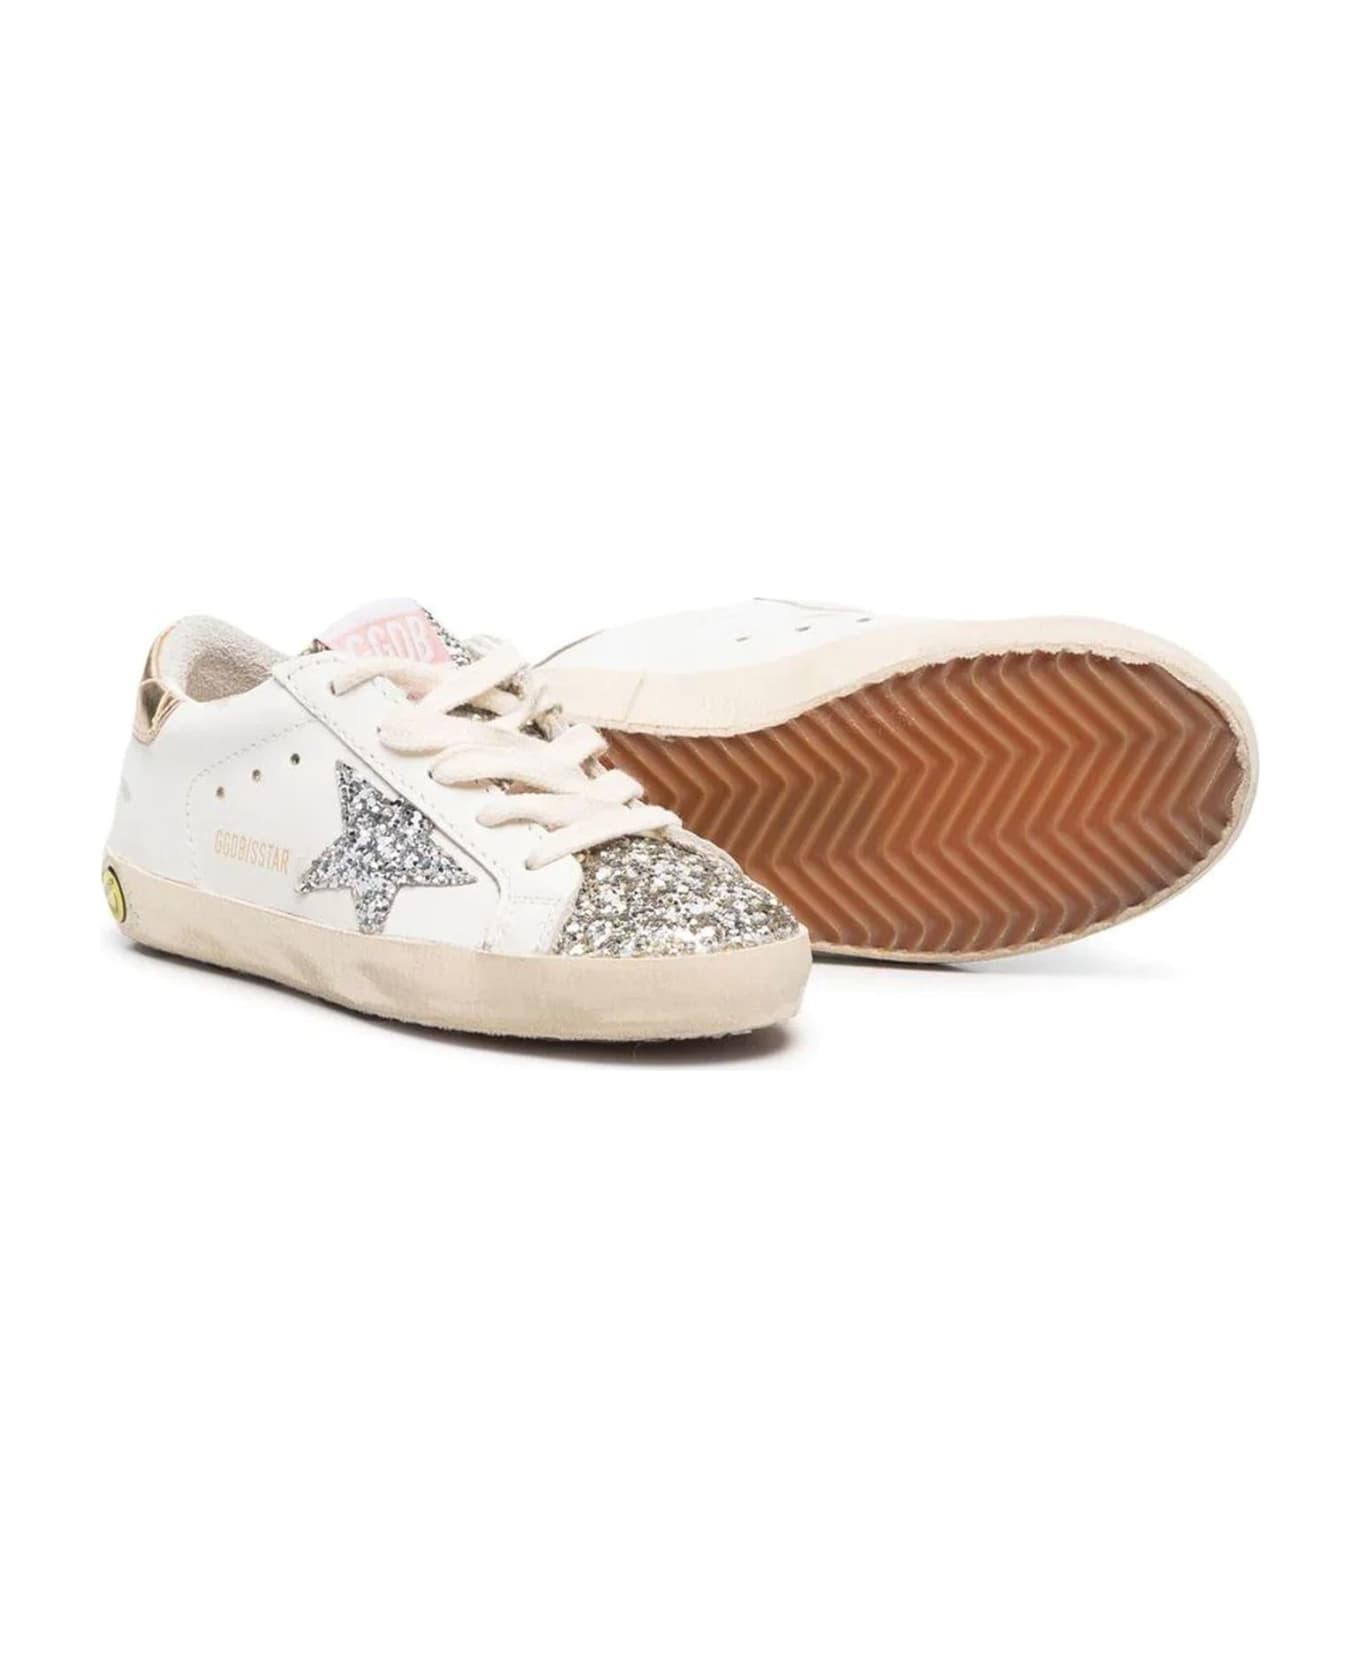 Golden Goose White Leather Sneakers - Bianco